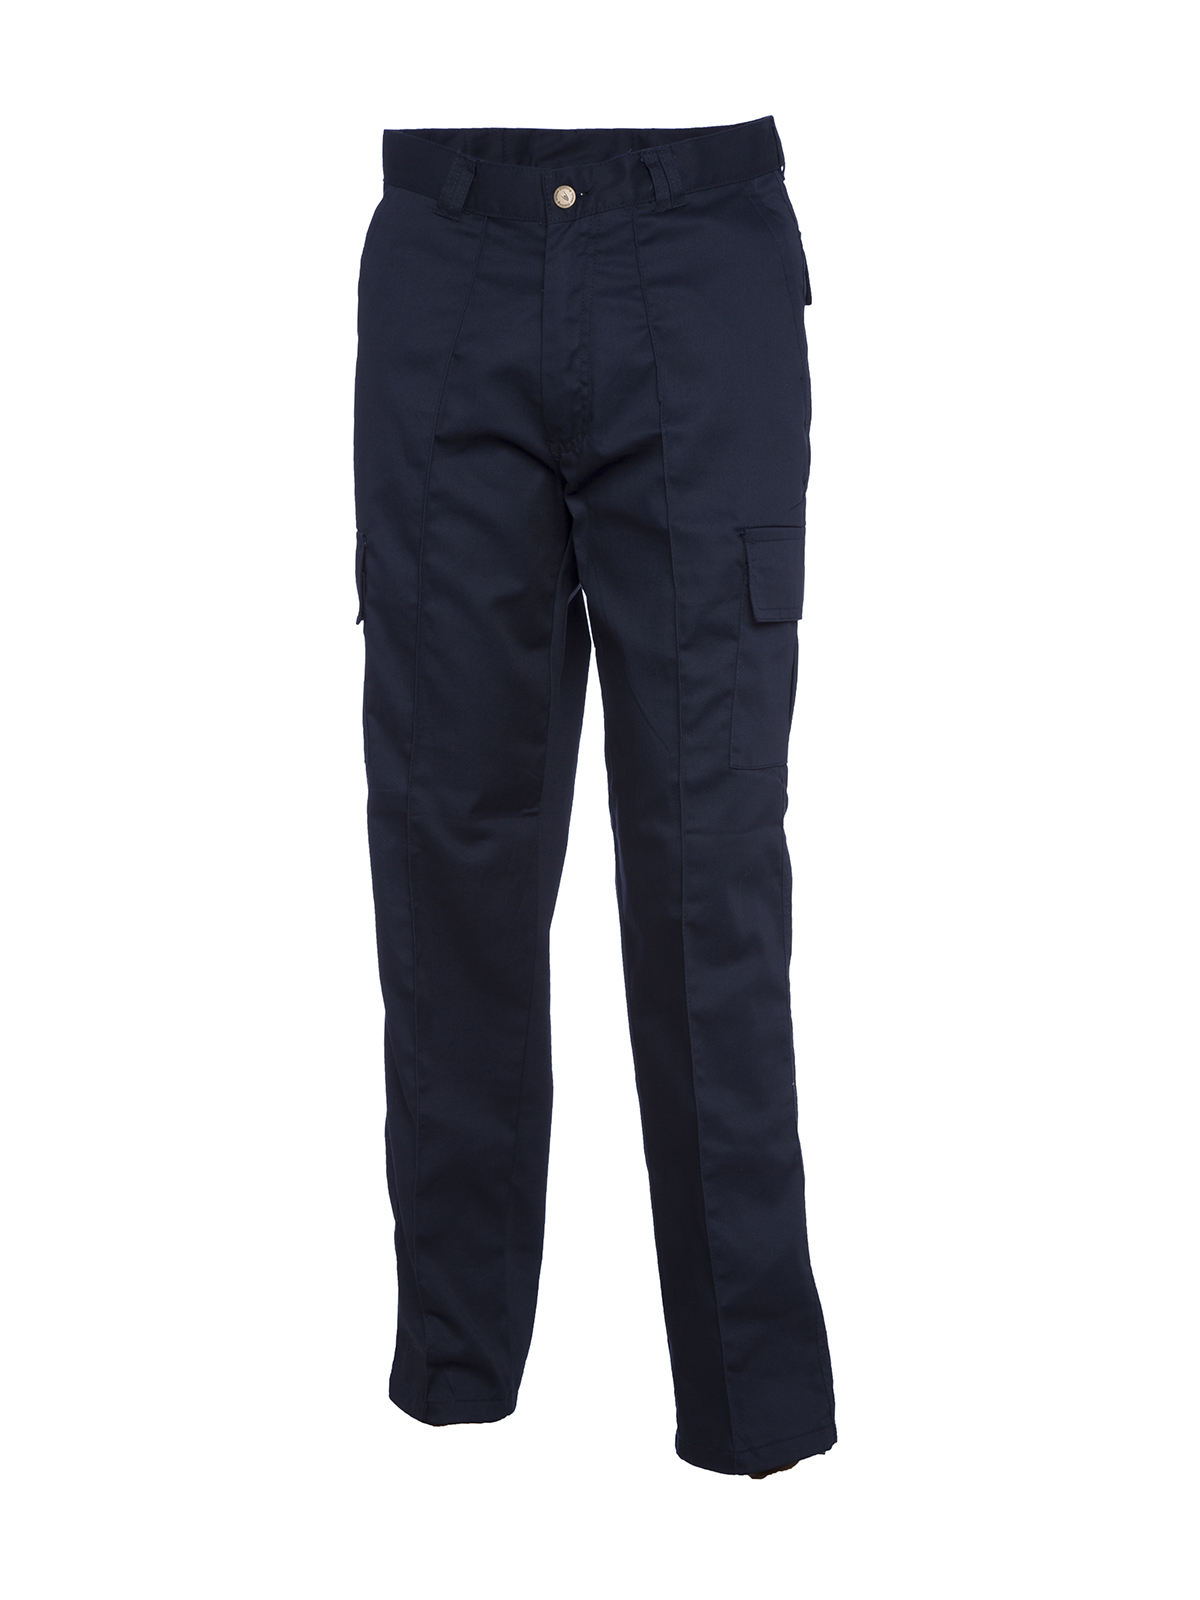 Cargo Trousers, Navy Blue - 40L